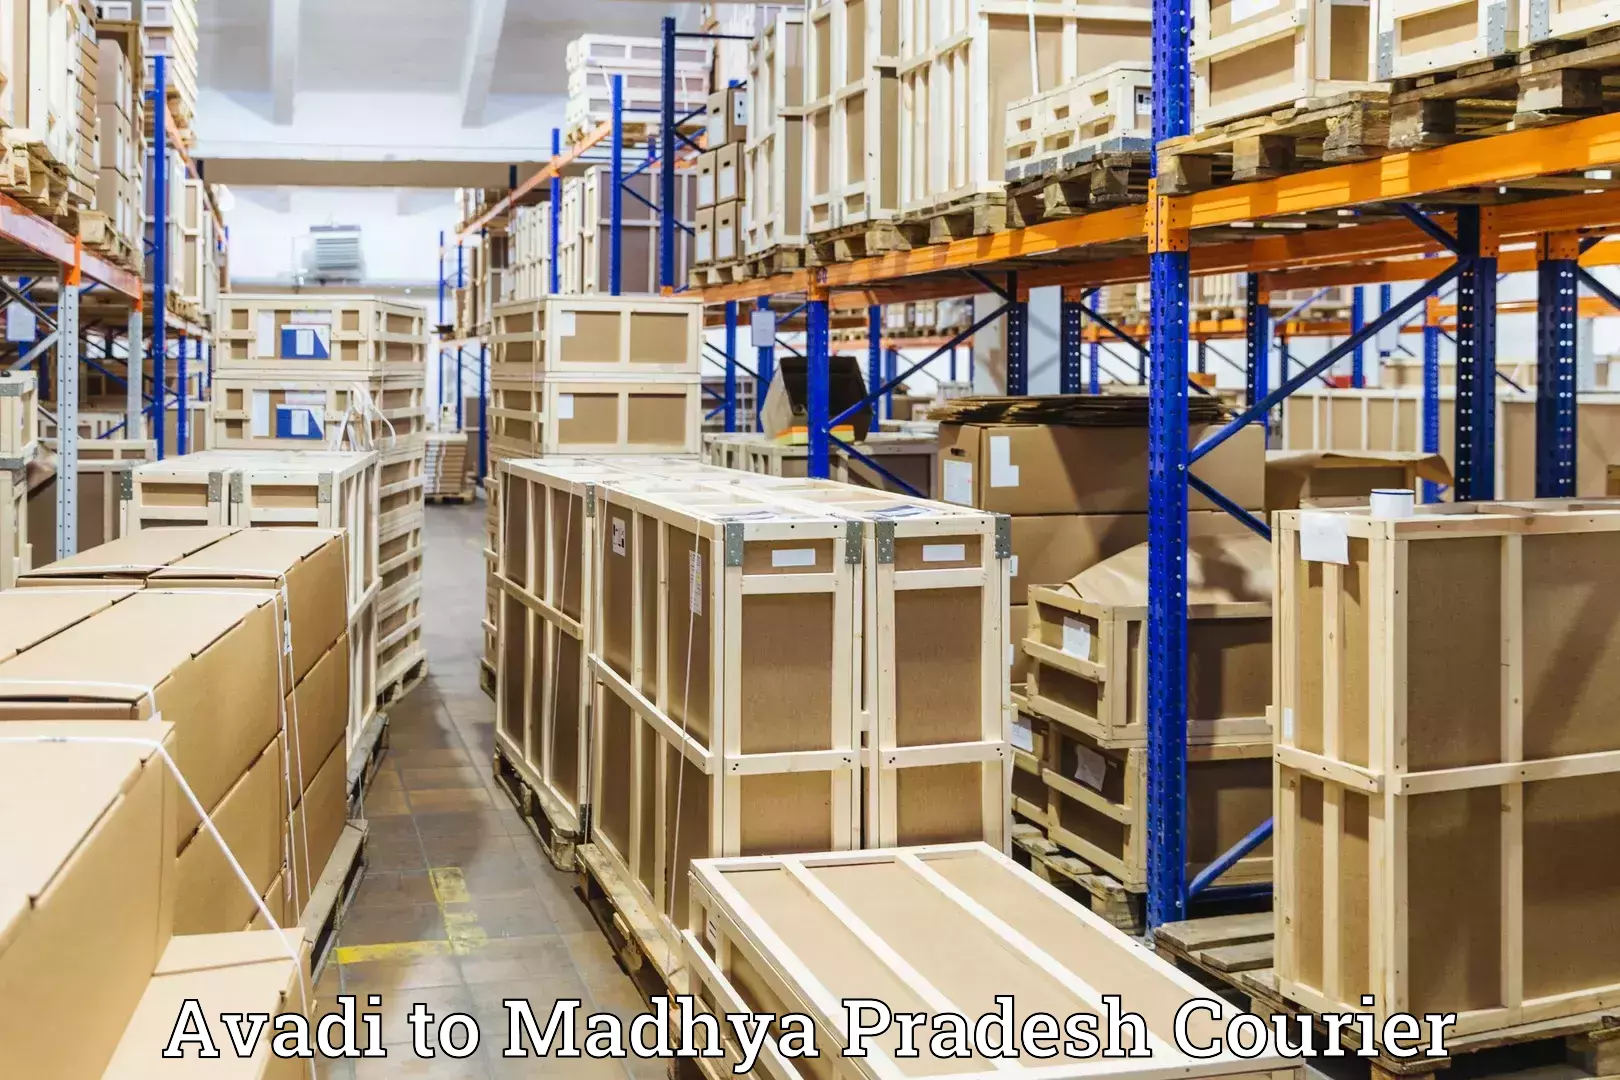 Baggage delivery technology Avadi to Khandwa